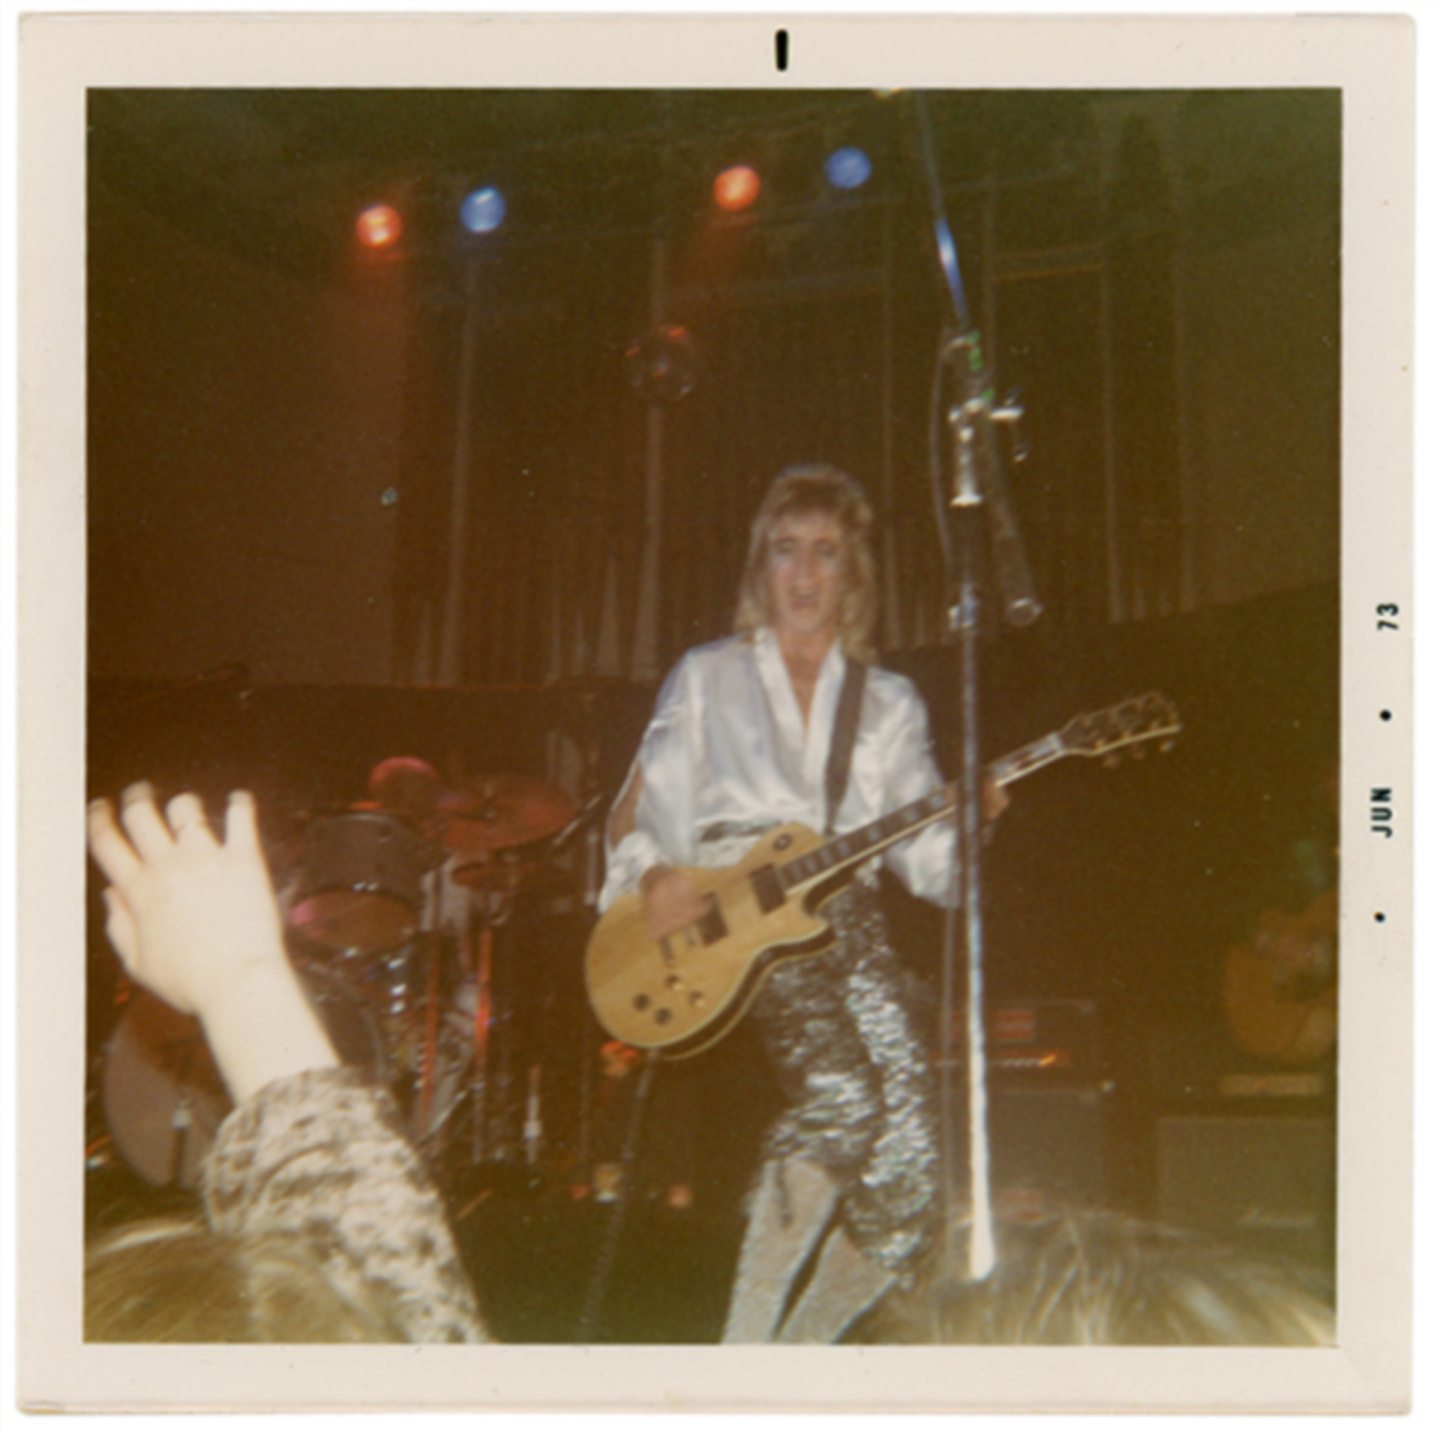 Mick Ronson on stage with David Bowie in Aberdeen